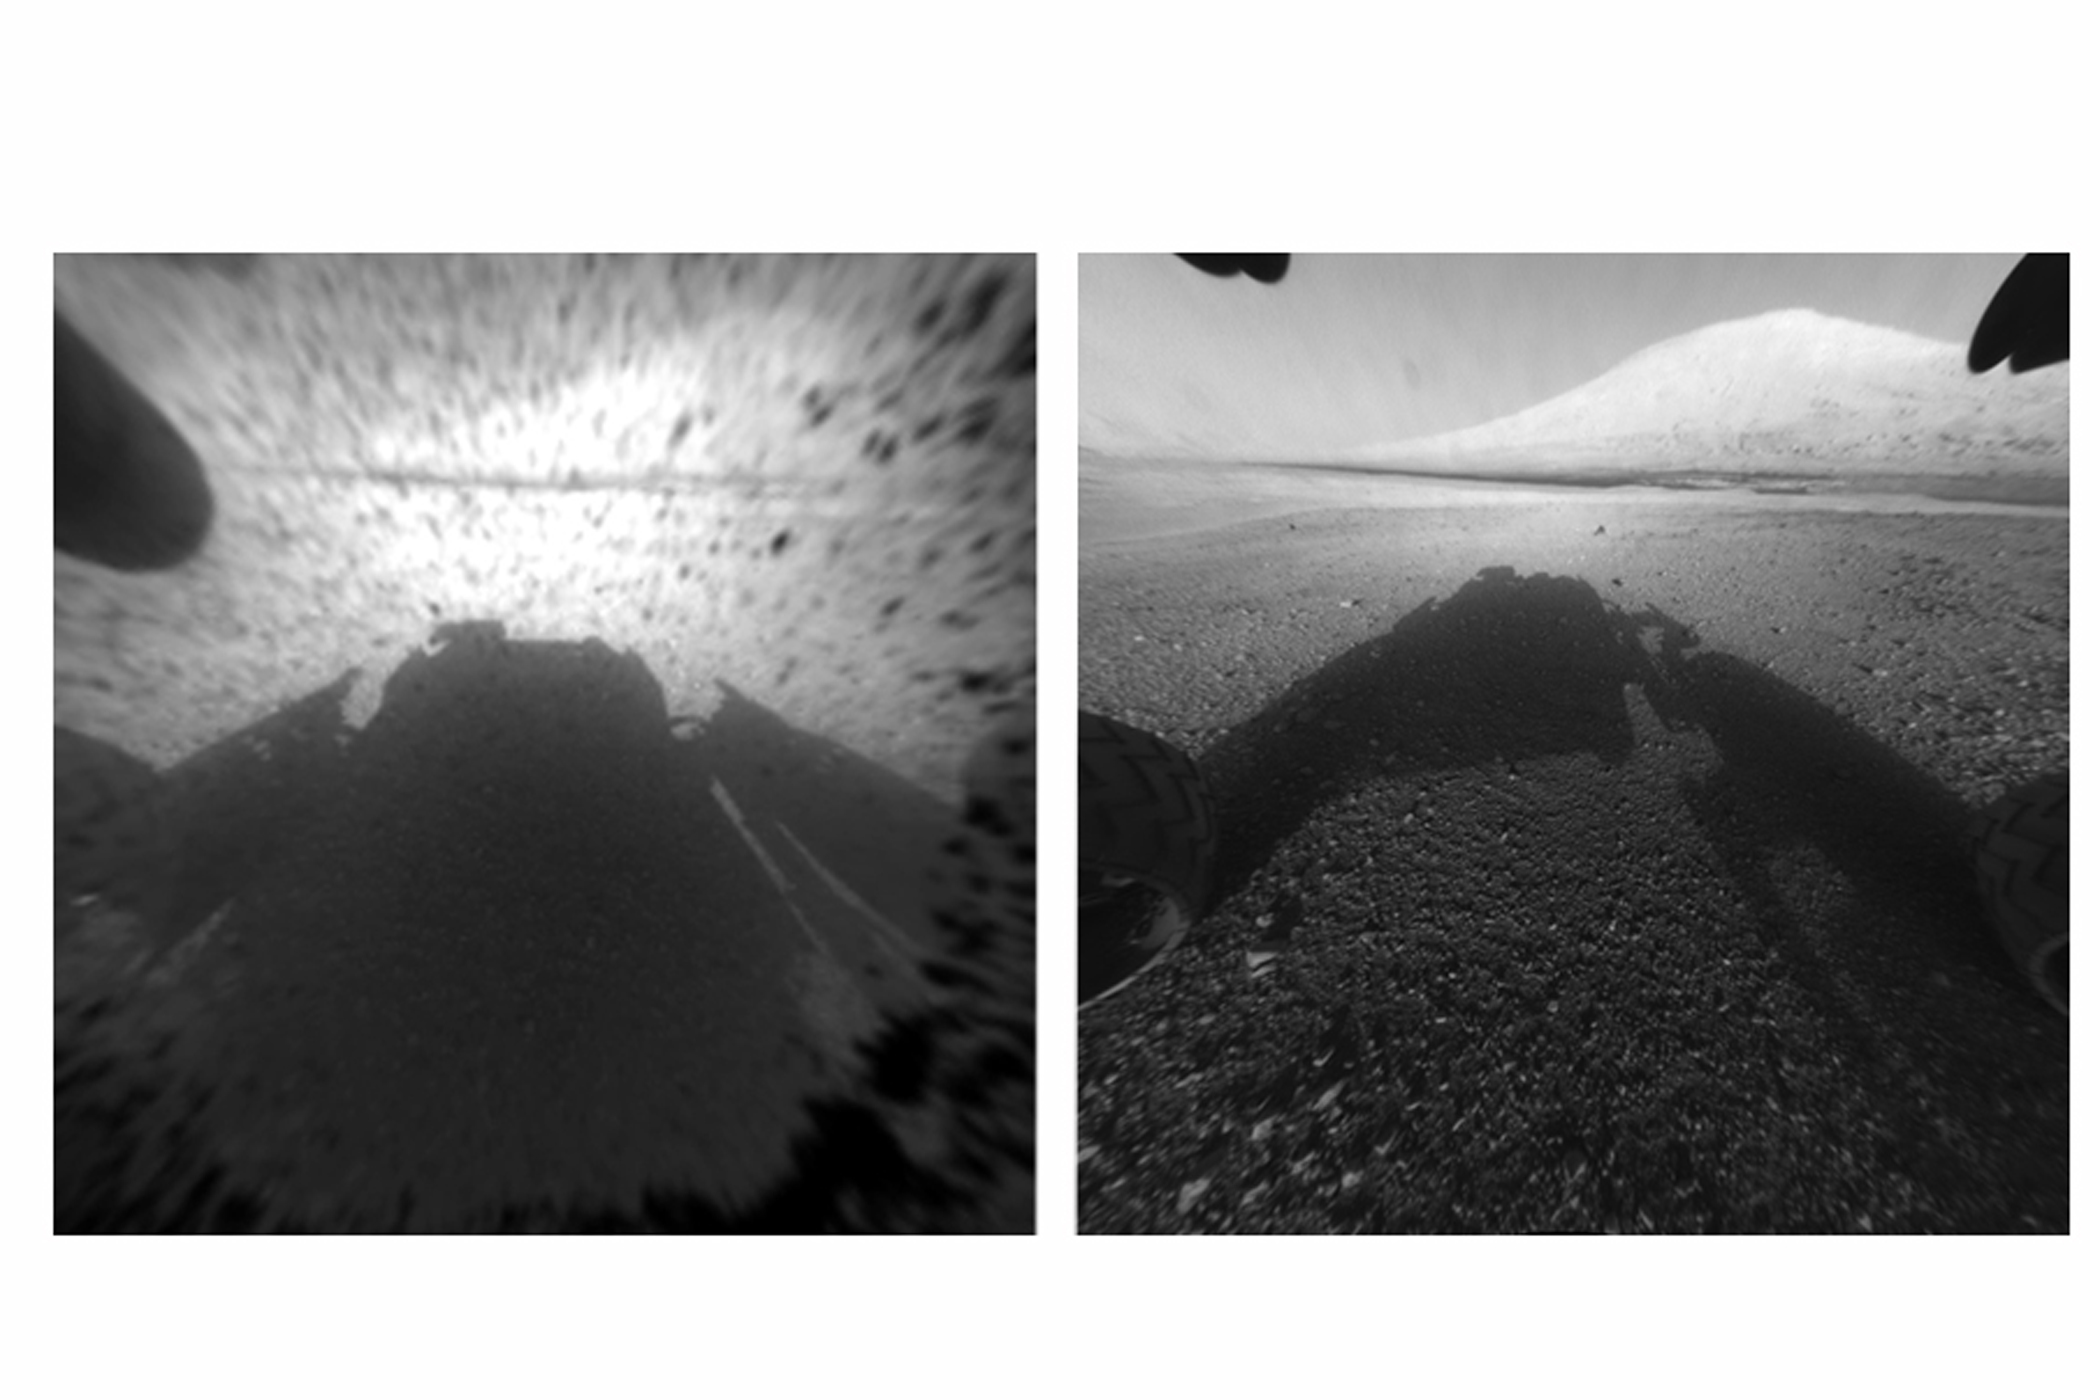 When the rover landed, it sent images from one of the hazard-avoidance cameras. The image at left was taken before the camera's dust cover was removed, the image on the right was taken after. These engineering cameras are located at the rover's base, and are lower-resolution than the color images produced by the rover's mast.